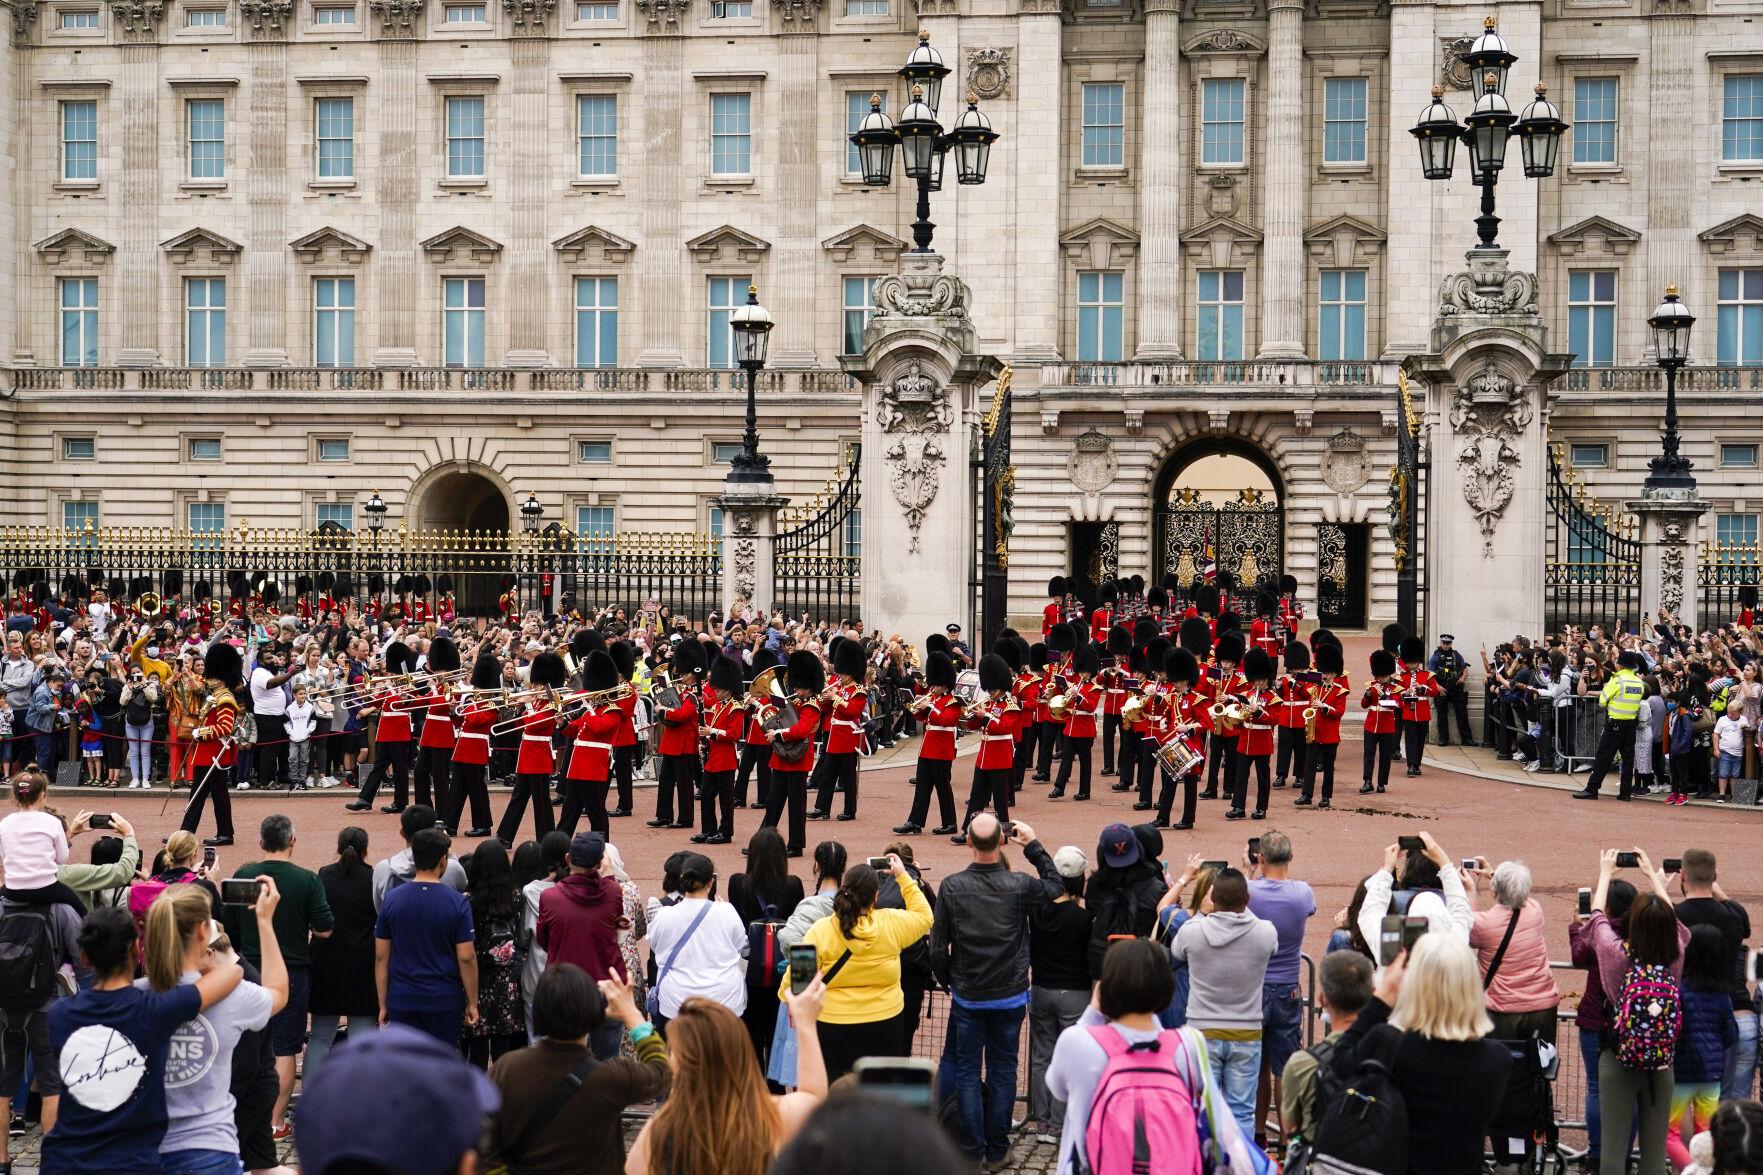 Watch now: Buckingham Palace changing of guard ceremony back after